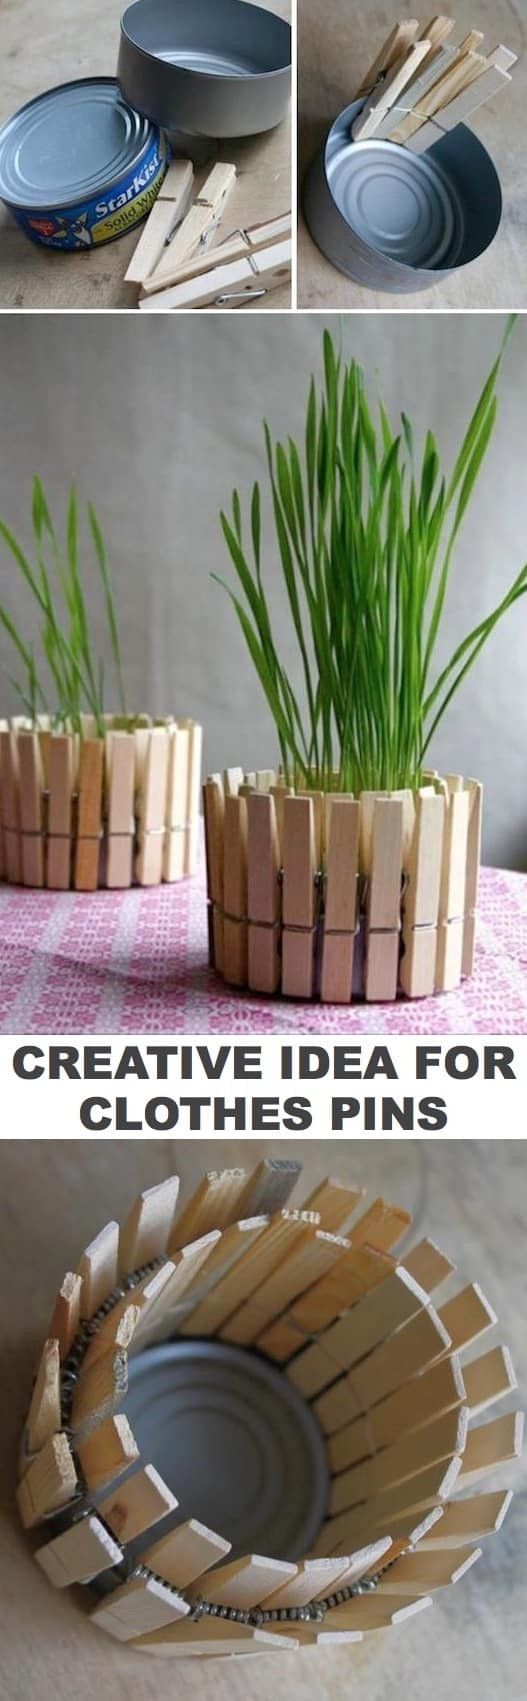 DIY Activities For Adults
 Easy DIY Craft Ideas That Will Spark Your Creativity for